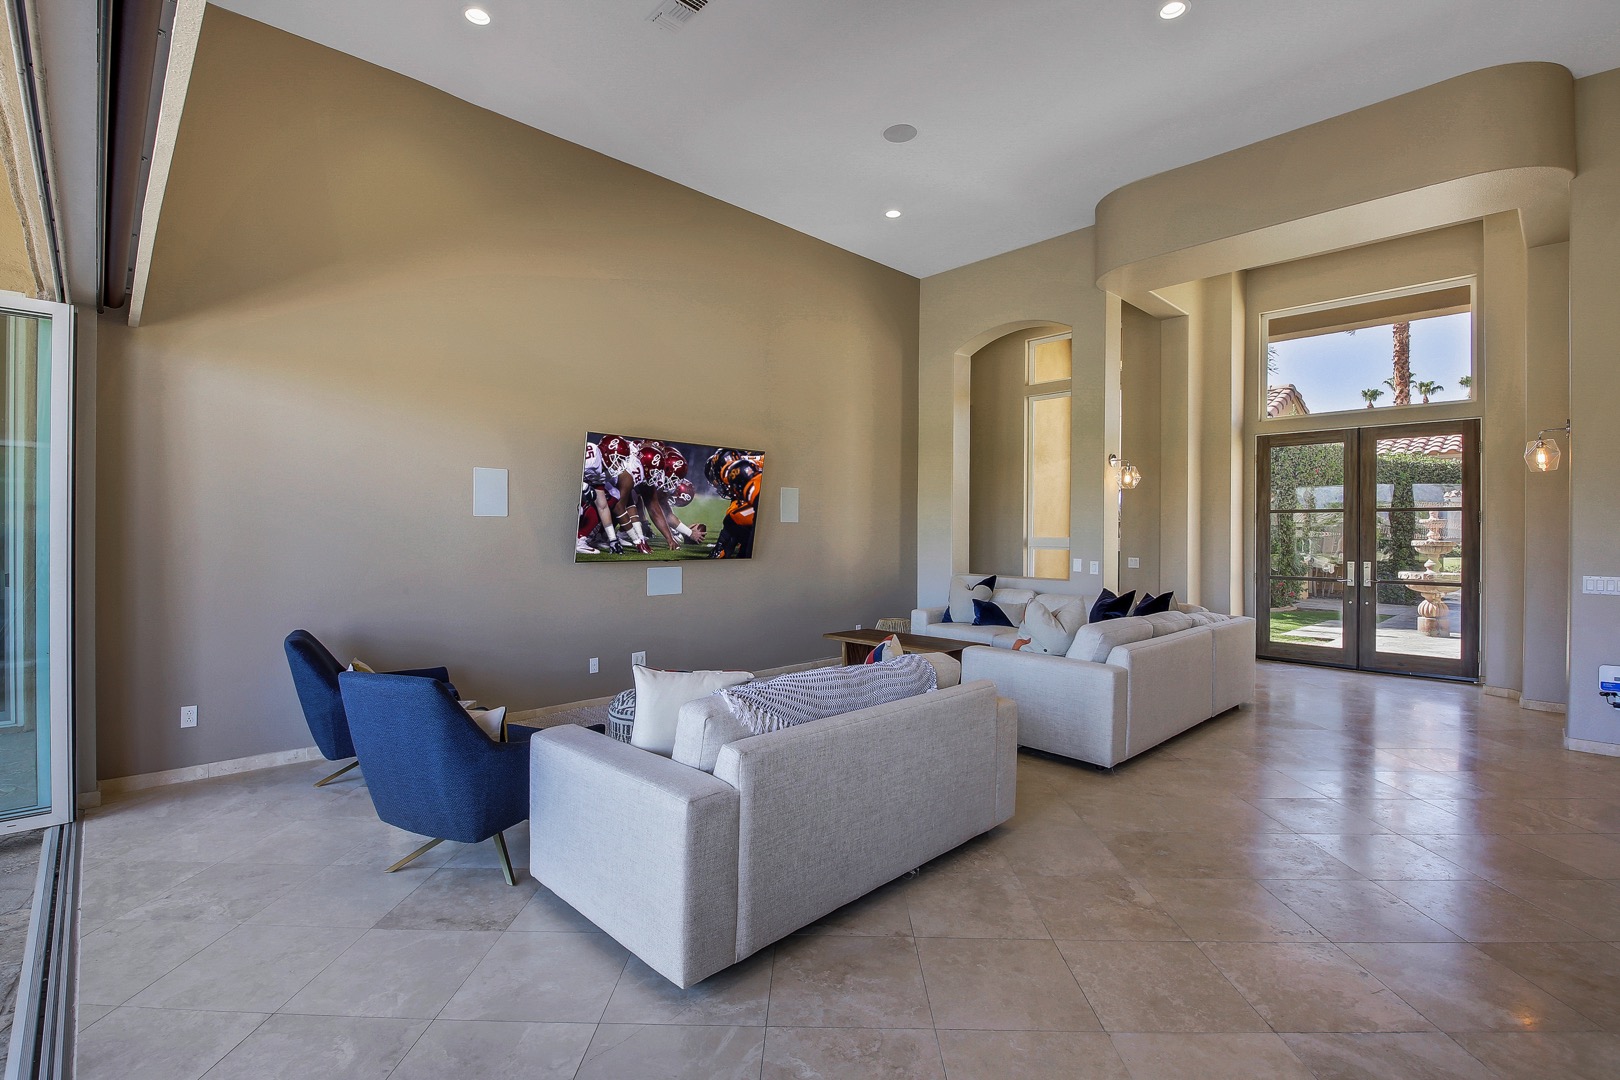 The open floor plan and large living room gives your whole group enough room to spread out.